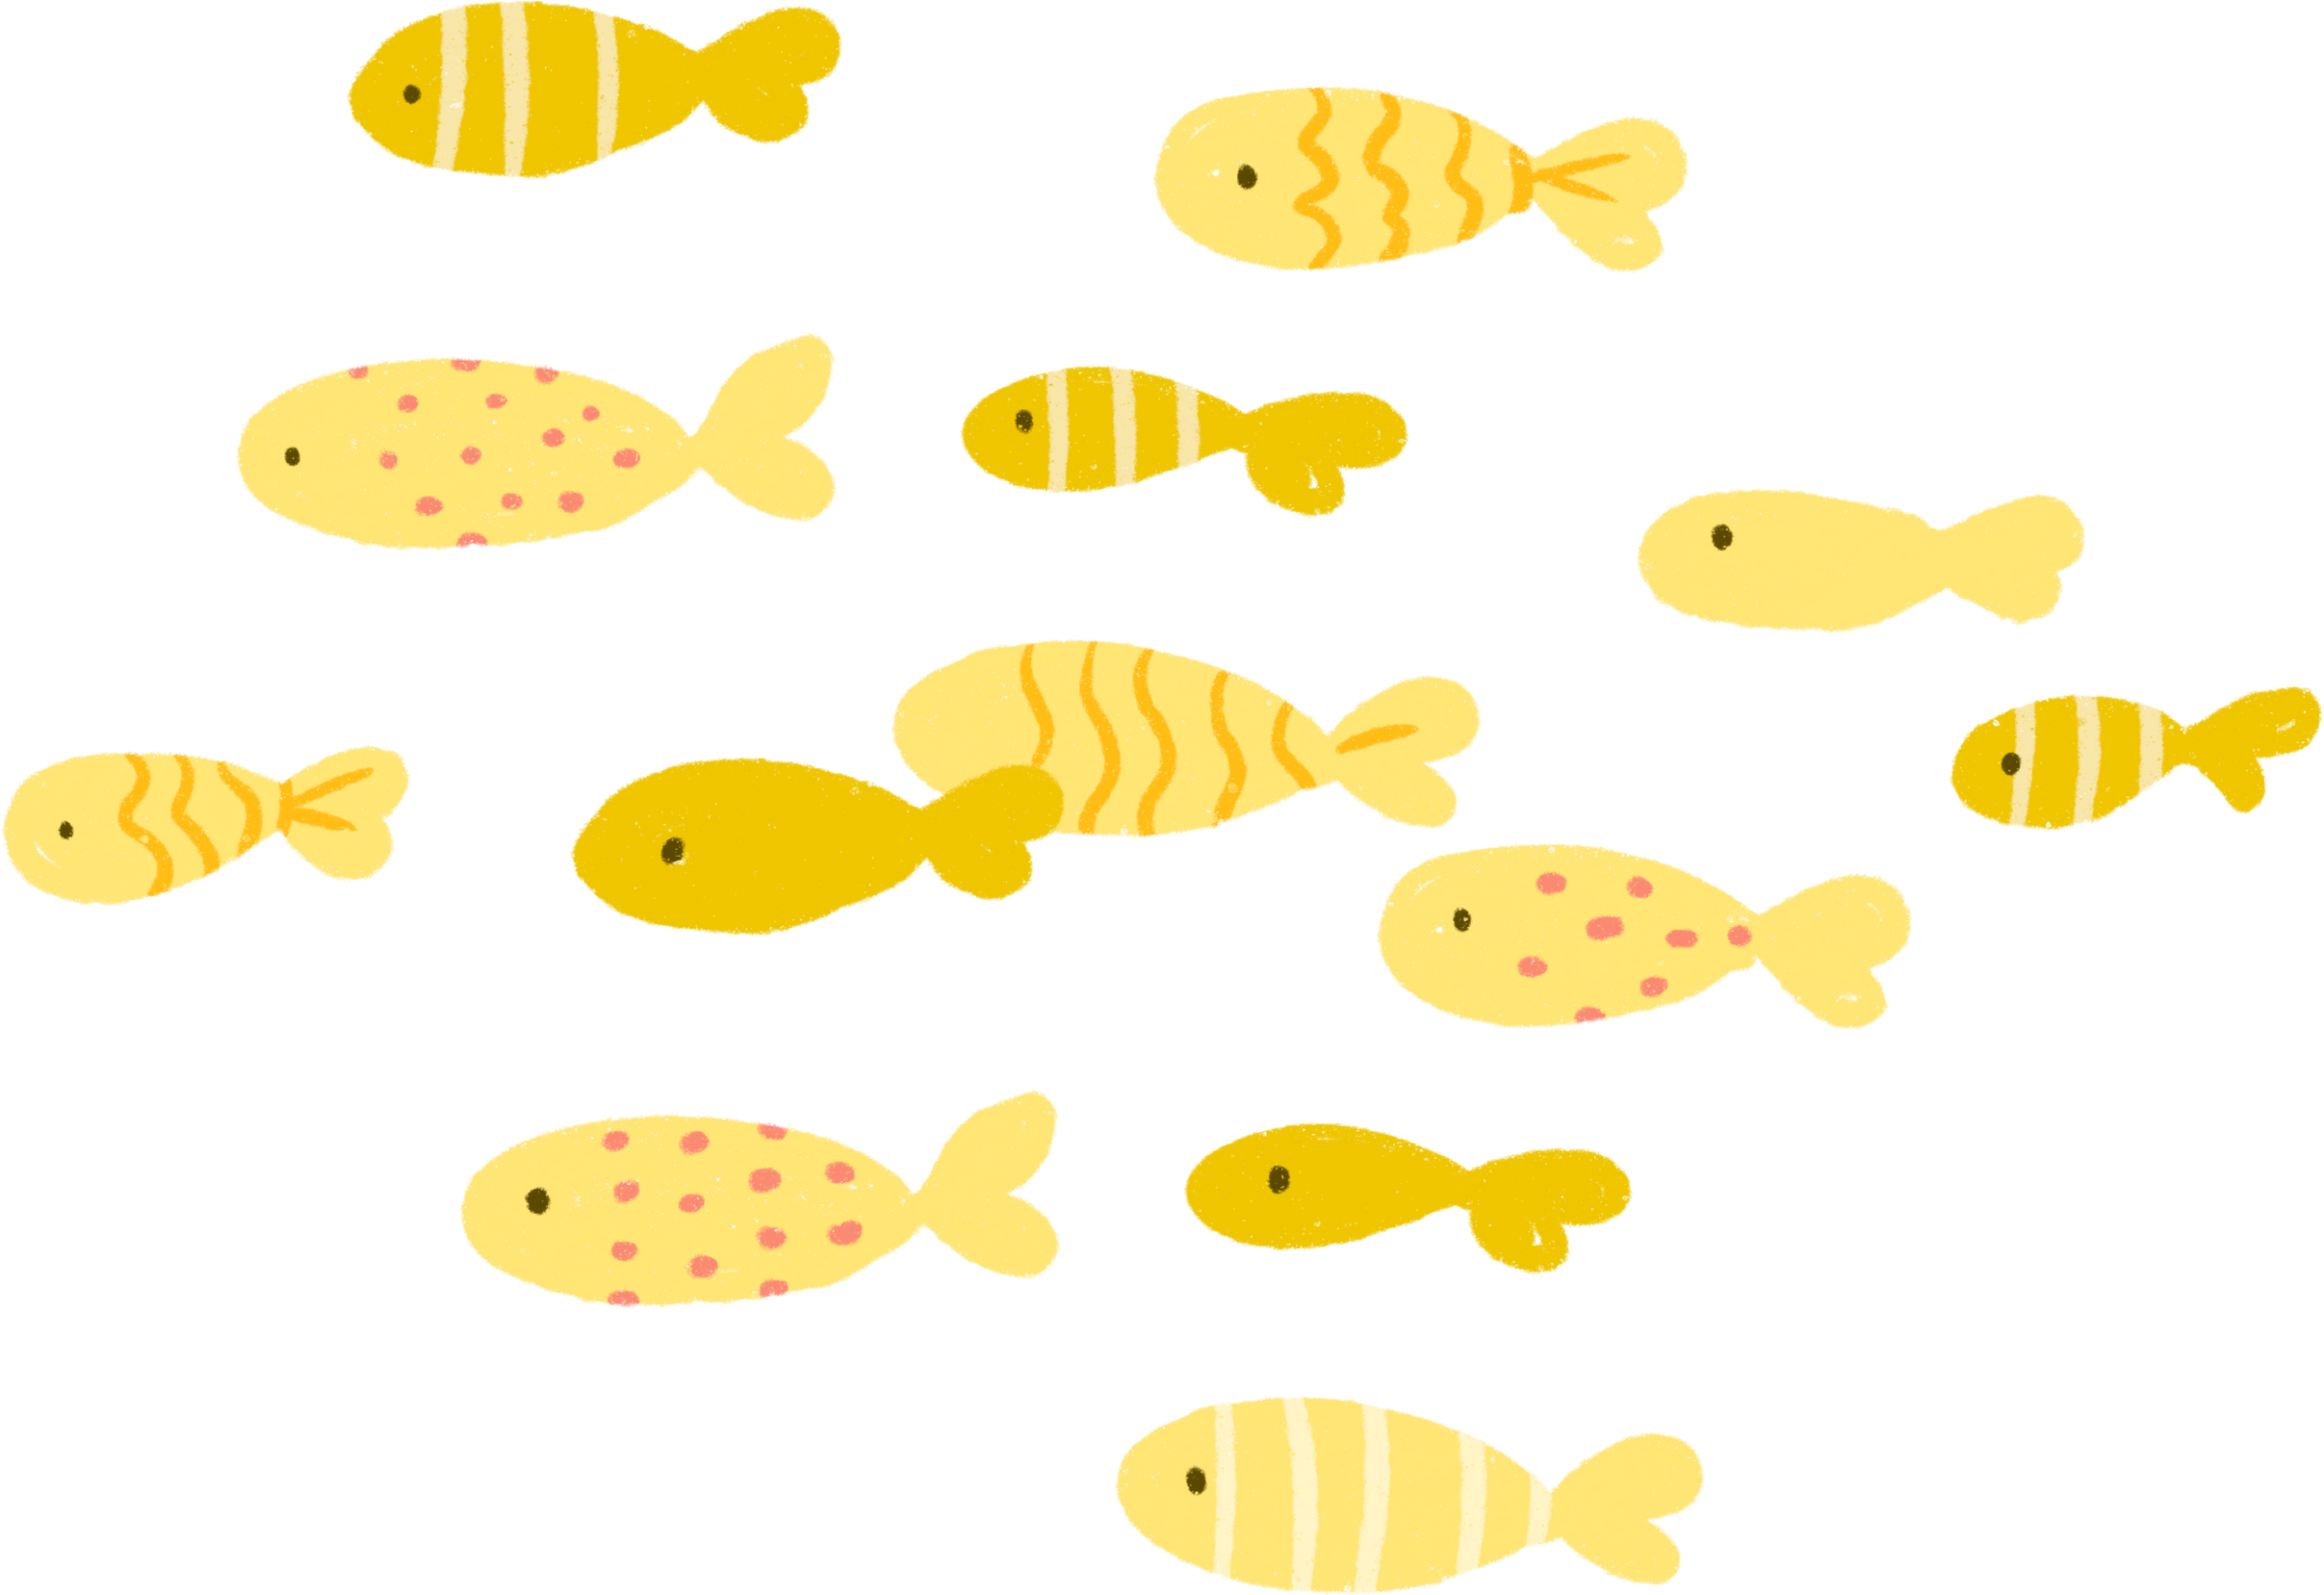 School of yellow fish with cute pattern